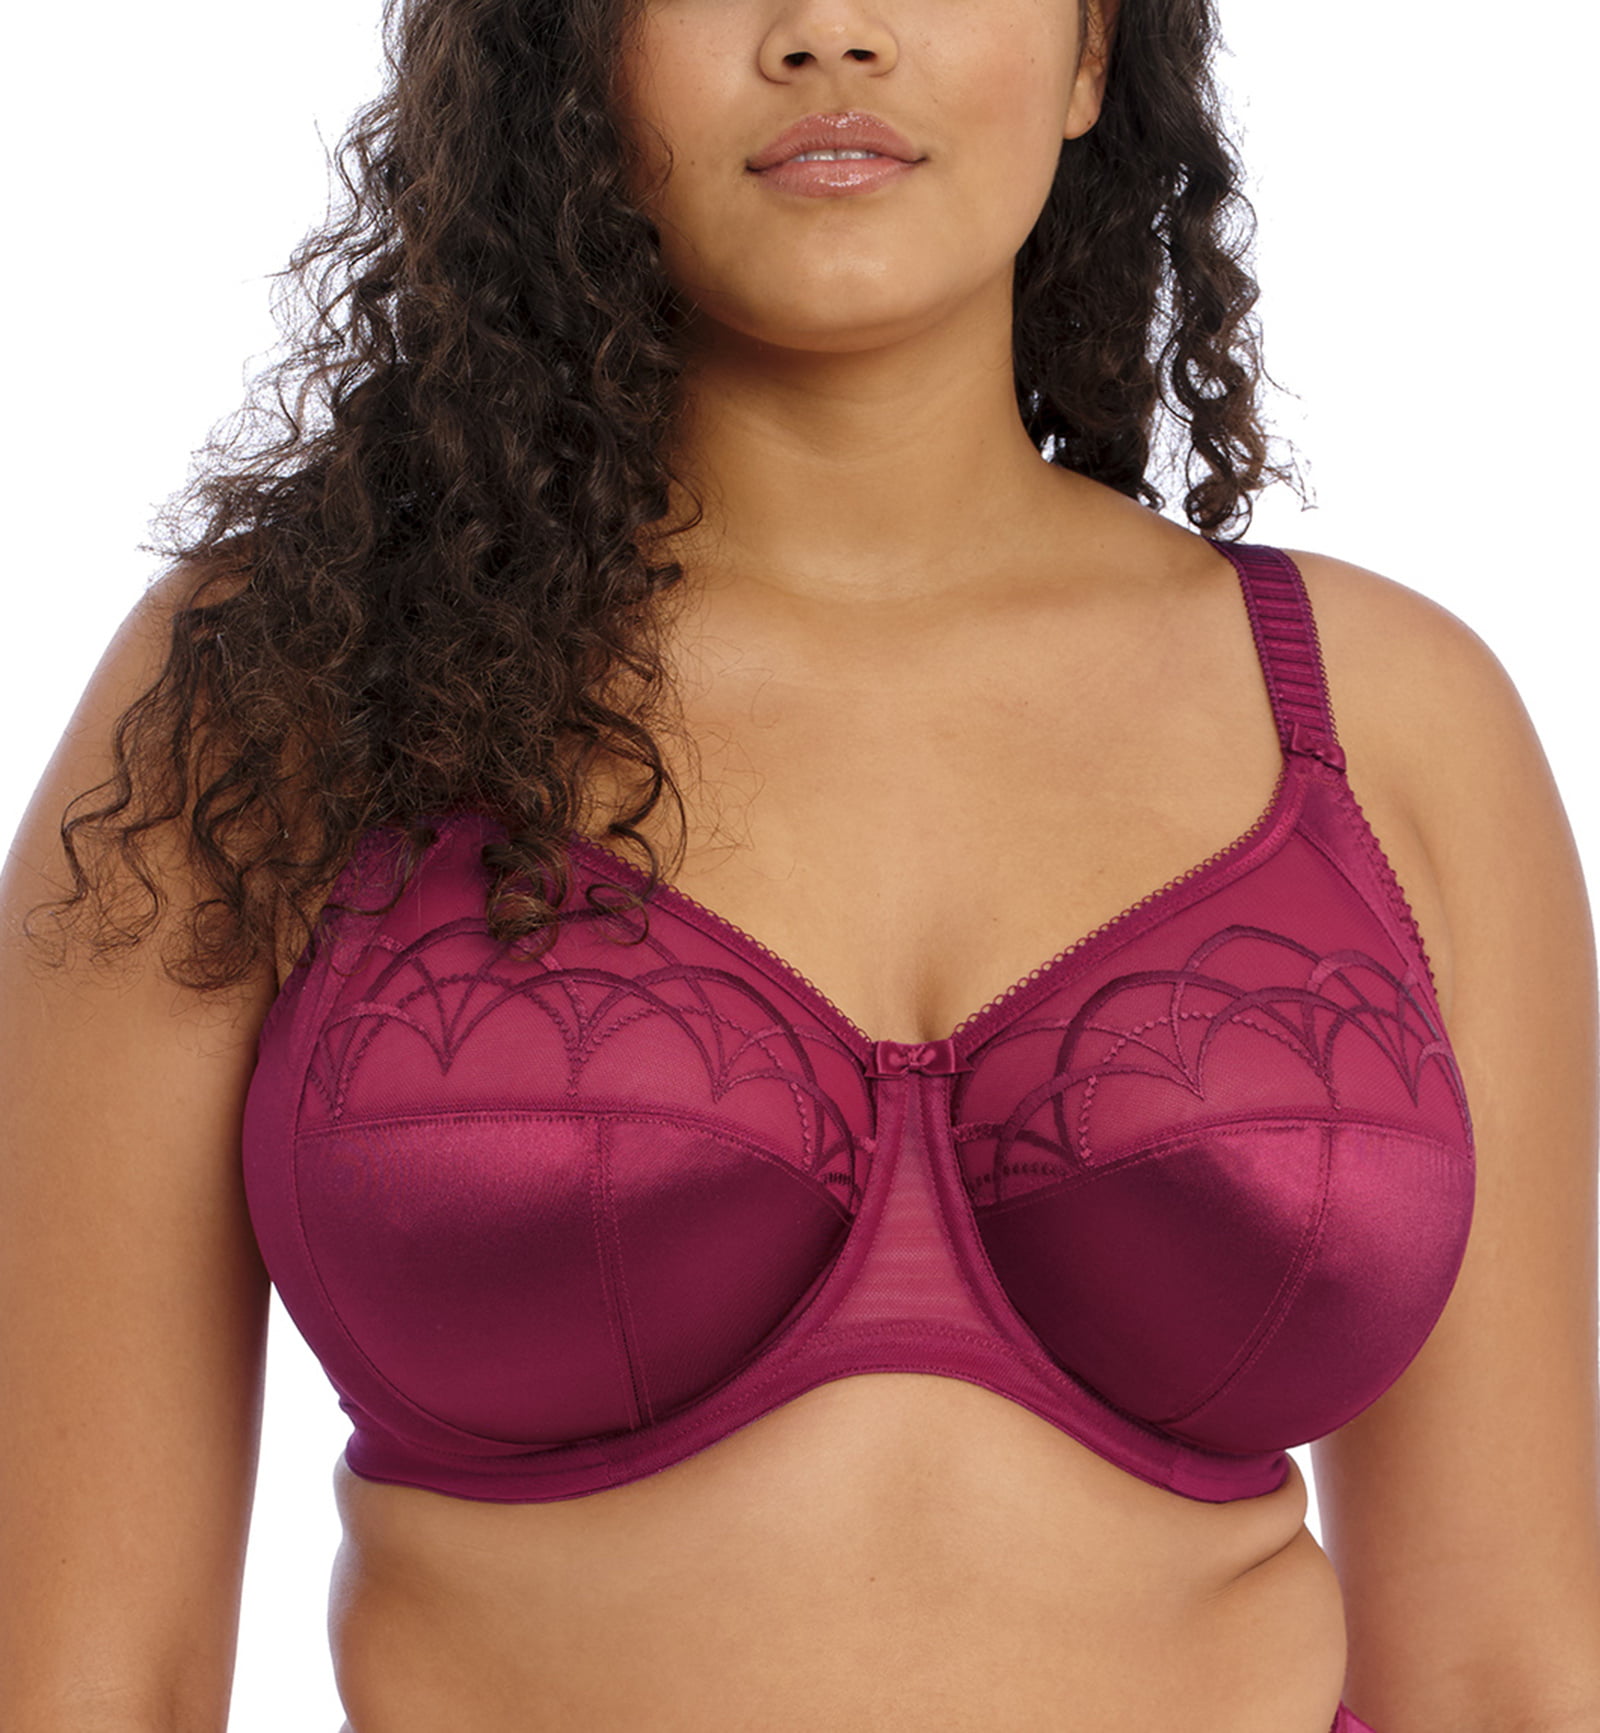 Wide Strap Bra Plus Size Full Coverage Underwire Support Panels 34 36 38 40  42 44 46 / C D E F G H I J ( 38H, Red) 